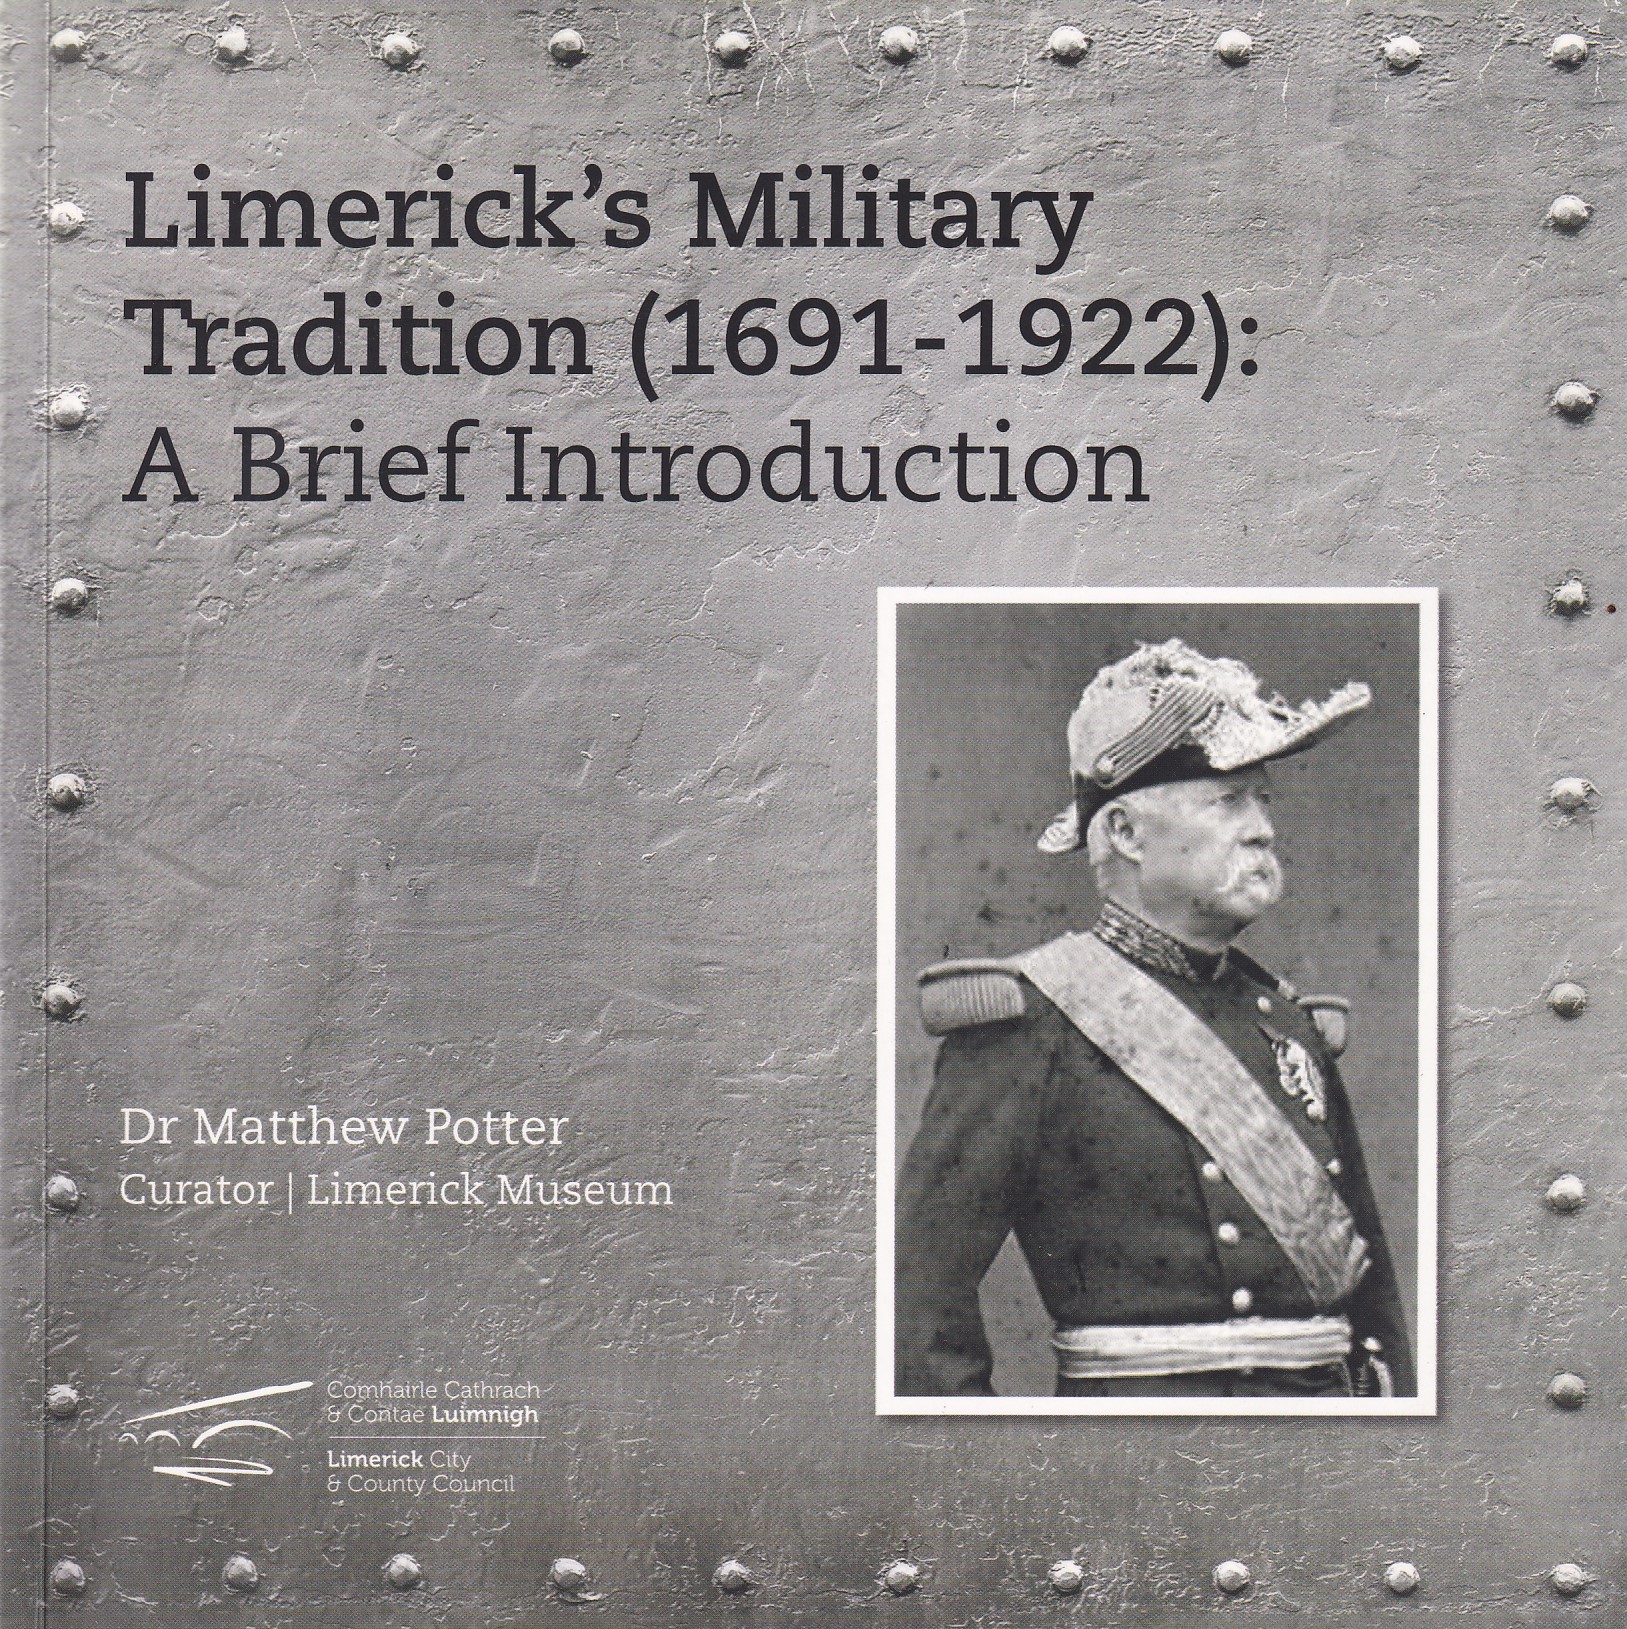 Limerick’s Military Tradition (1691-1922): A Brief Introduction [Signed] by Dr Matthew Potter